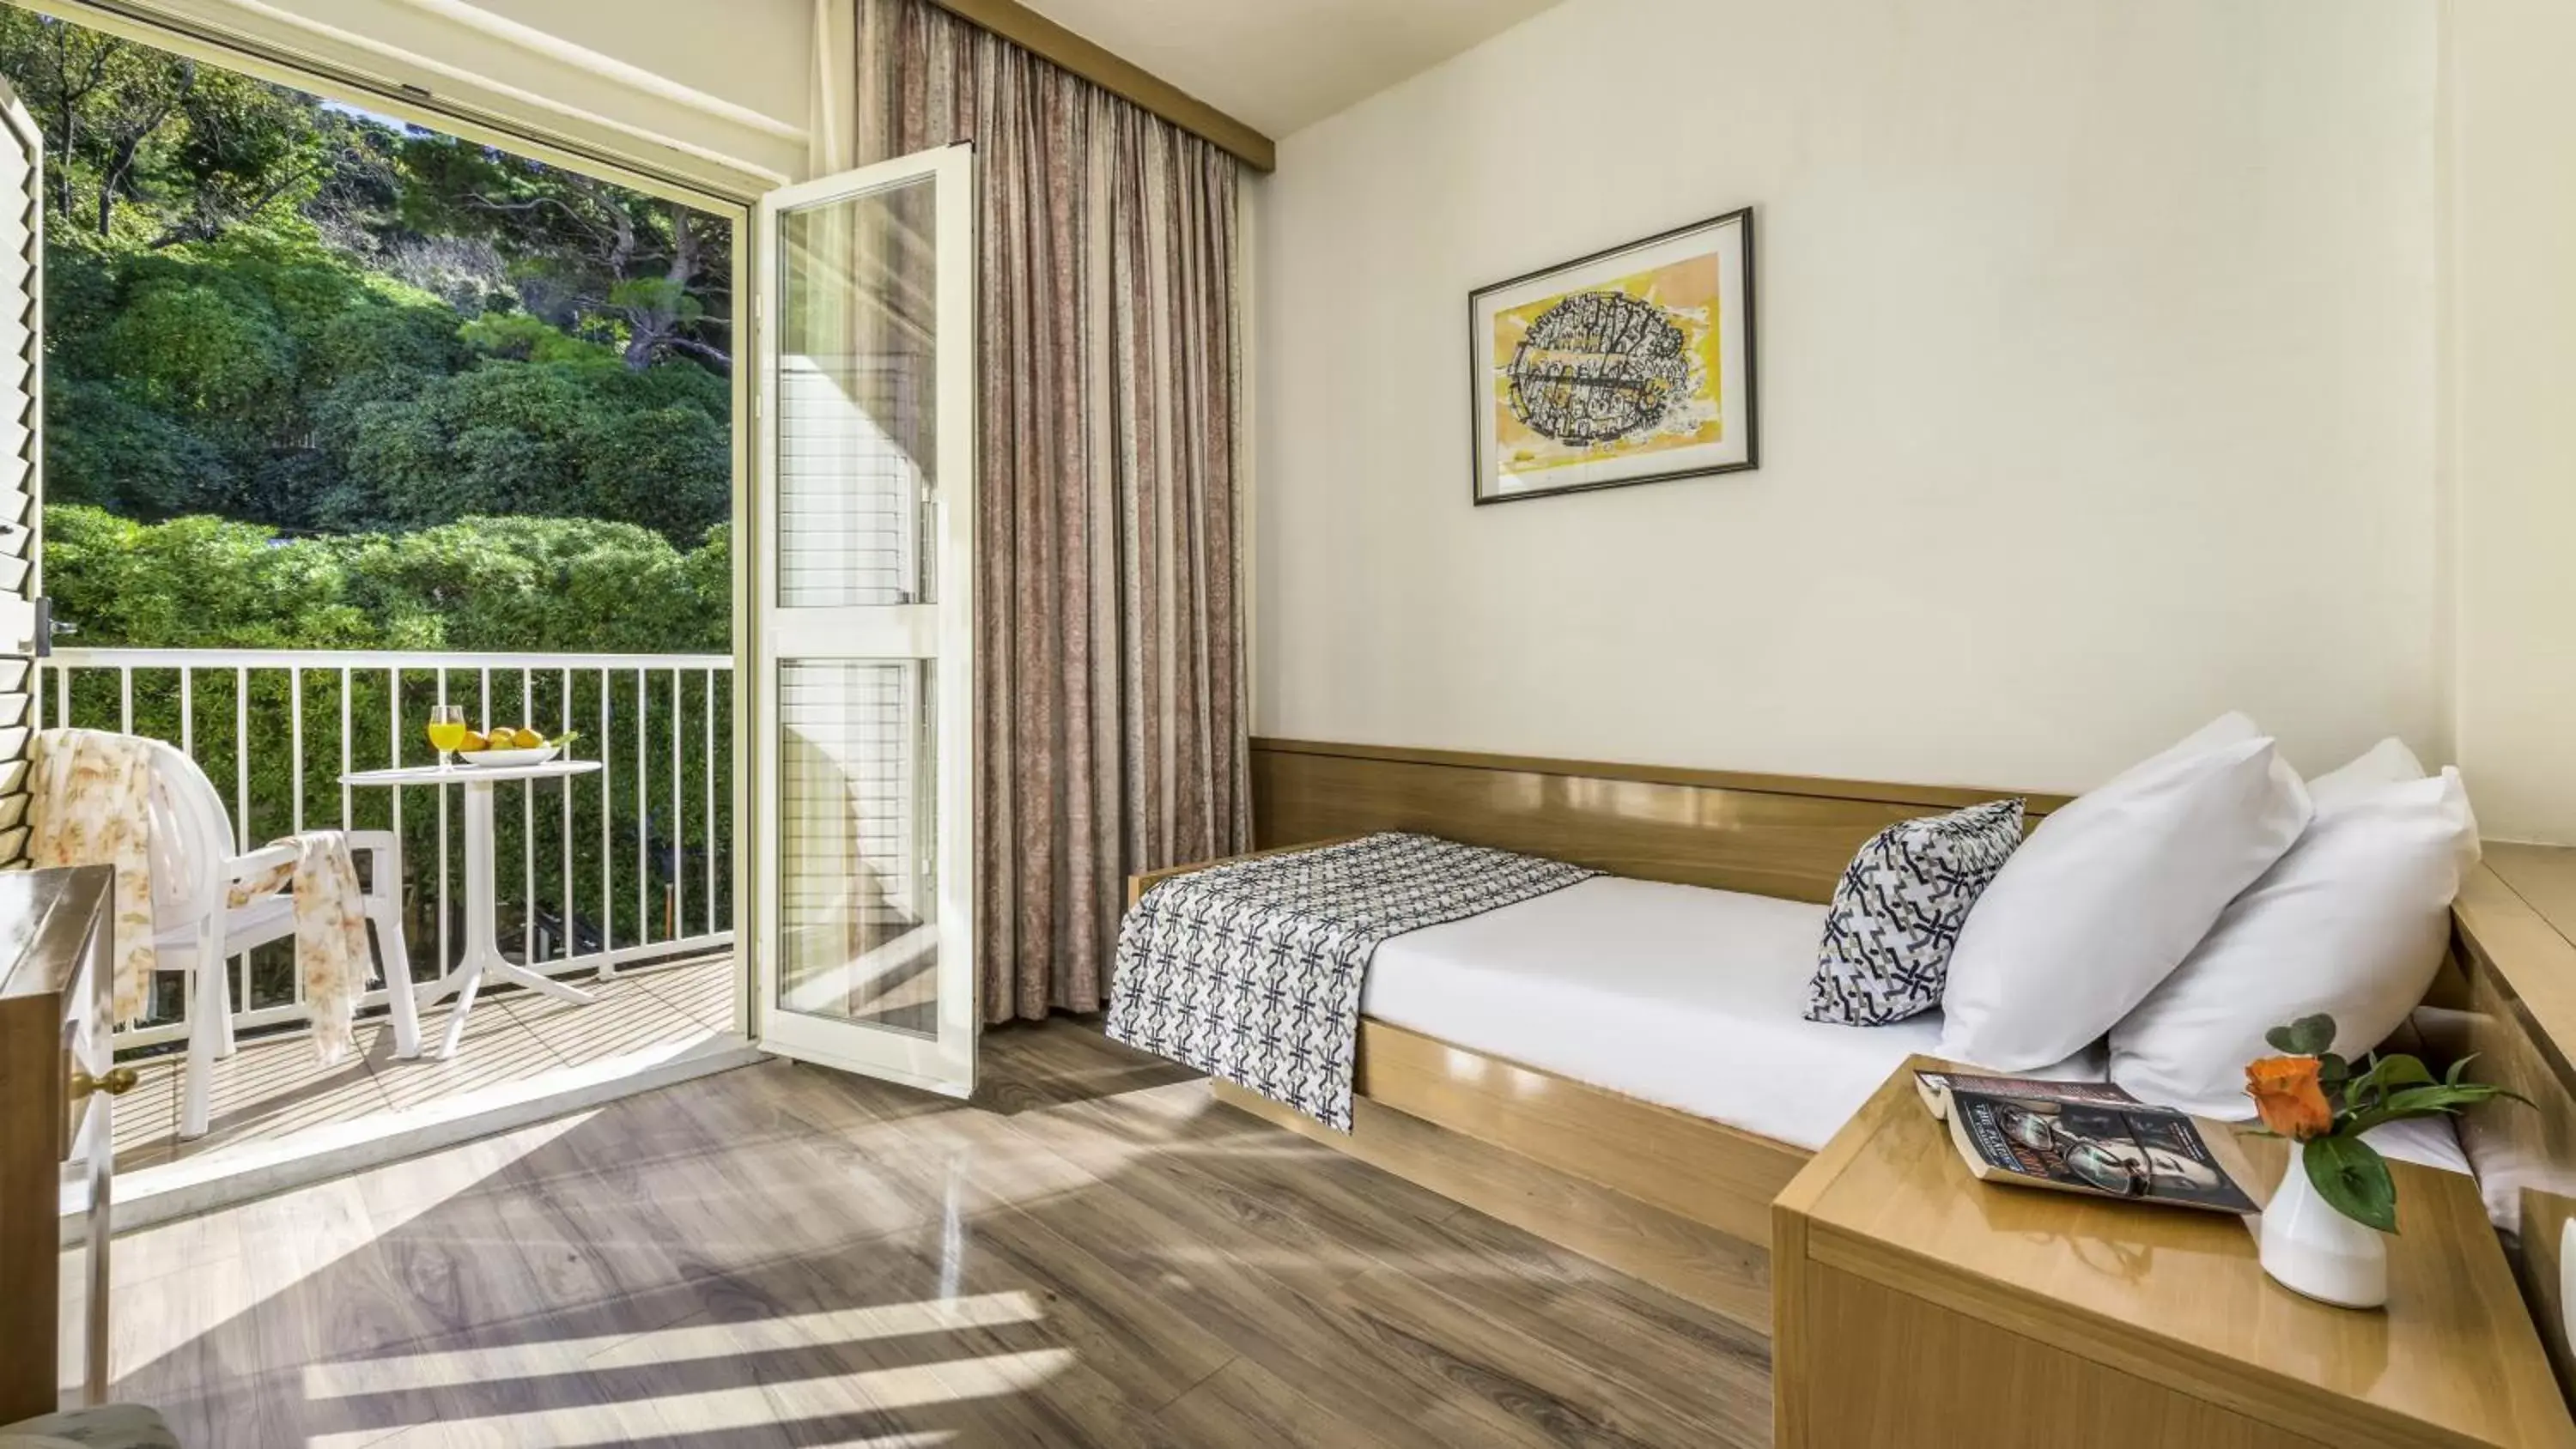 Standard Single Room with Park View and Balcony in Hotel Splendid